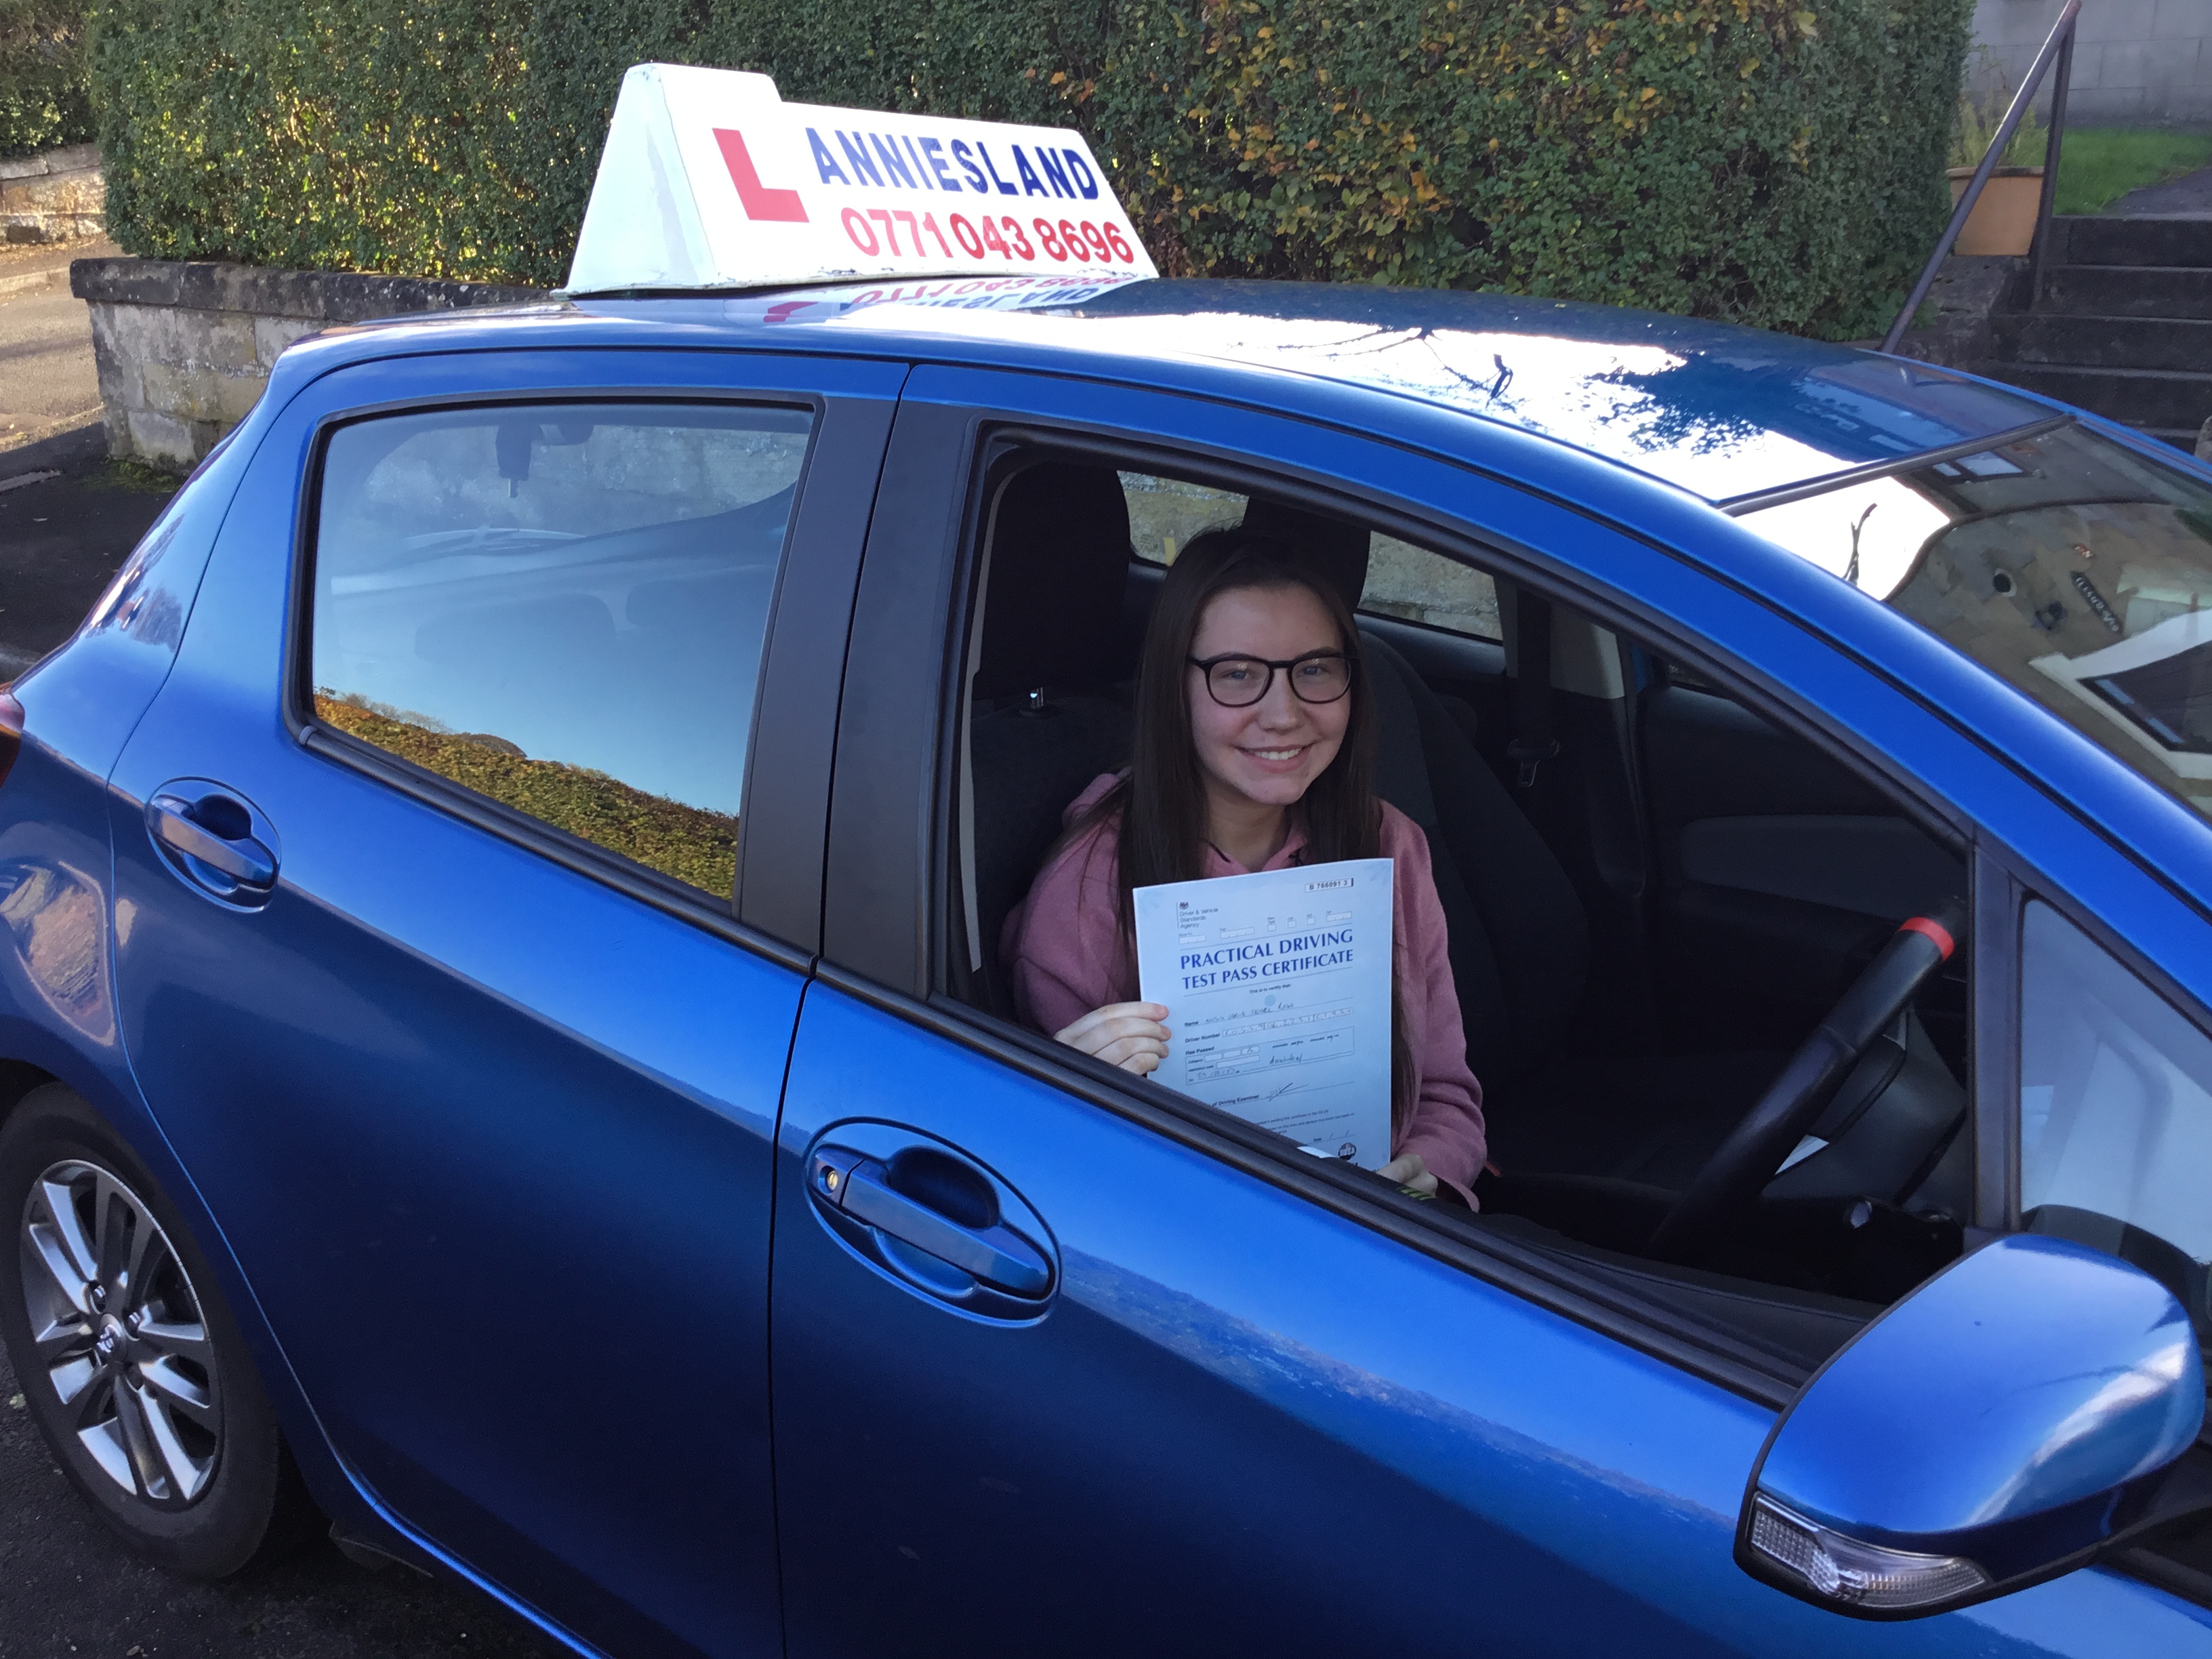 Carla Ross successfully passed their driving test with Anniesland Driving School